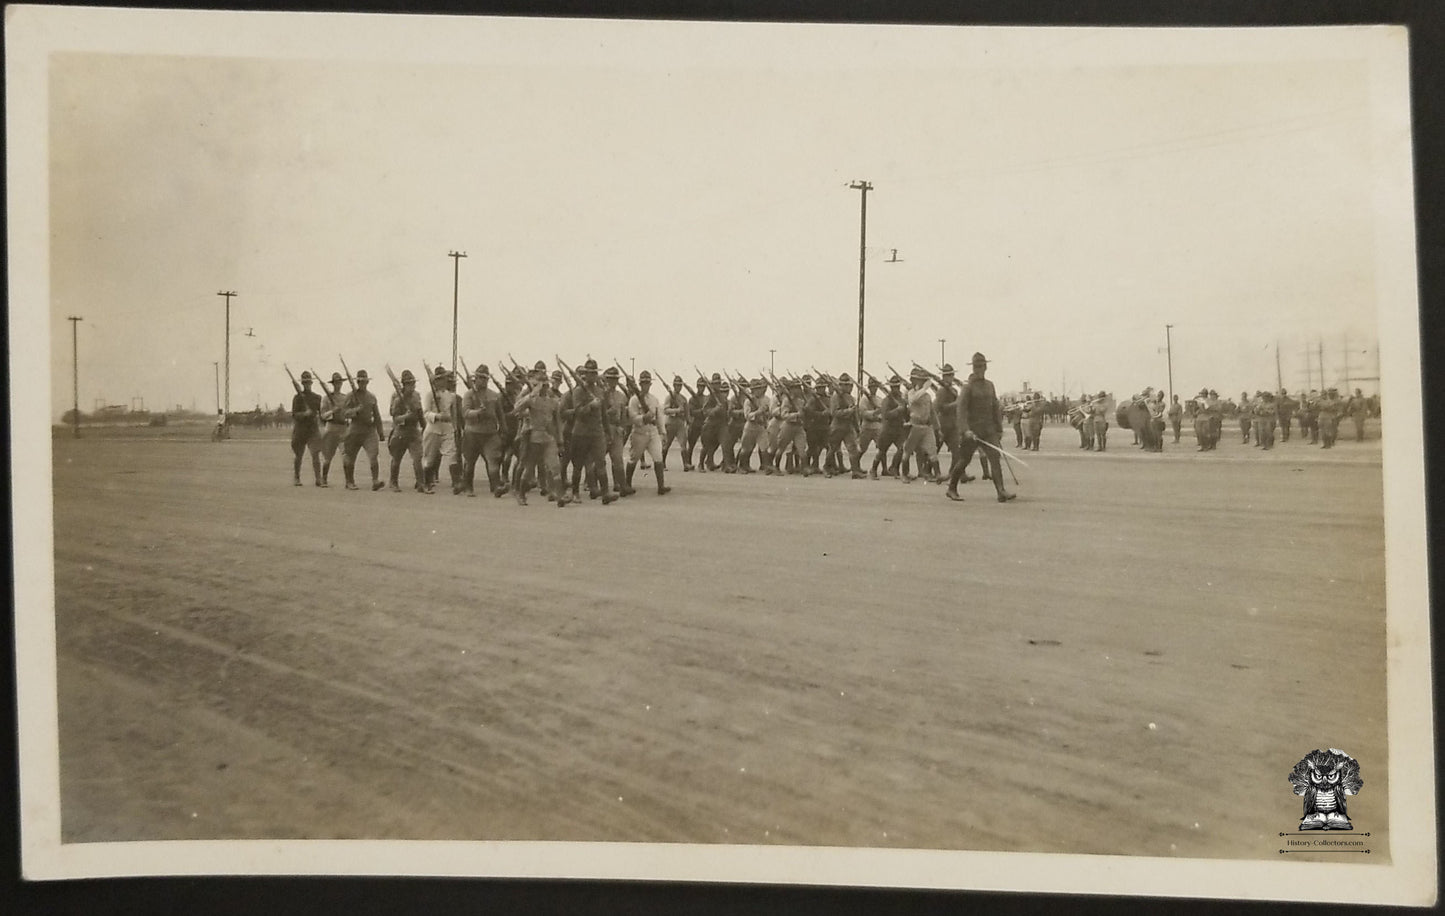 c1918 RPPC Picture Postcard - Post WWI US Army March Naval Military Transit Point Formation March With Marching Band - AZO Stamp Box